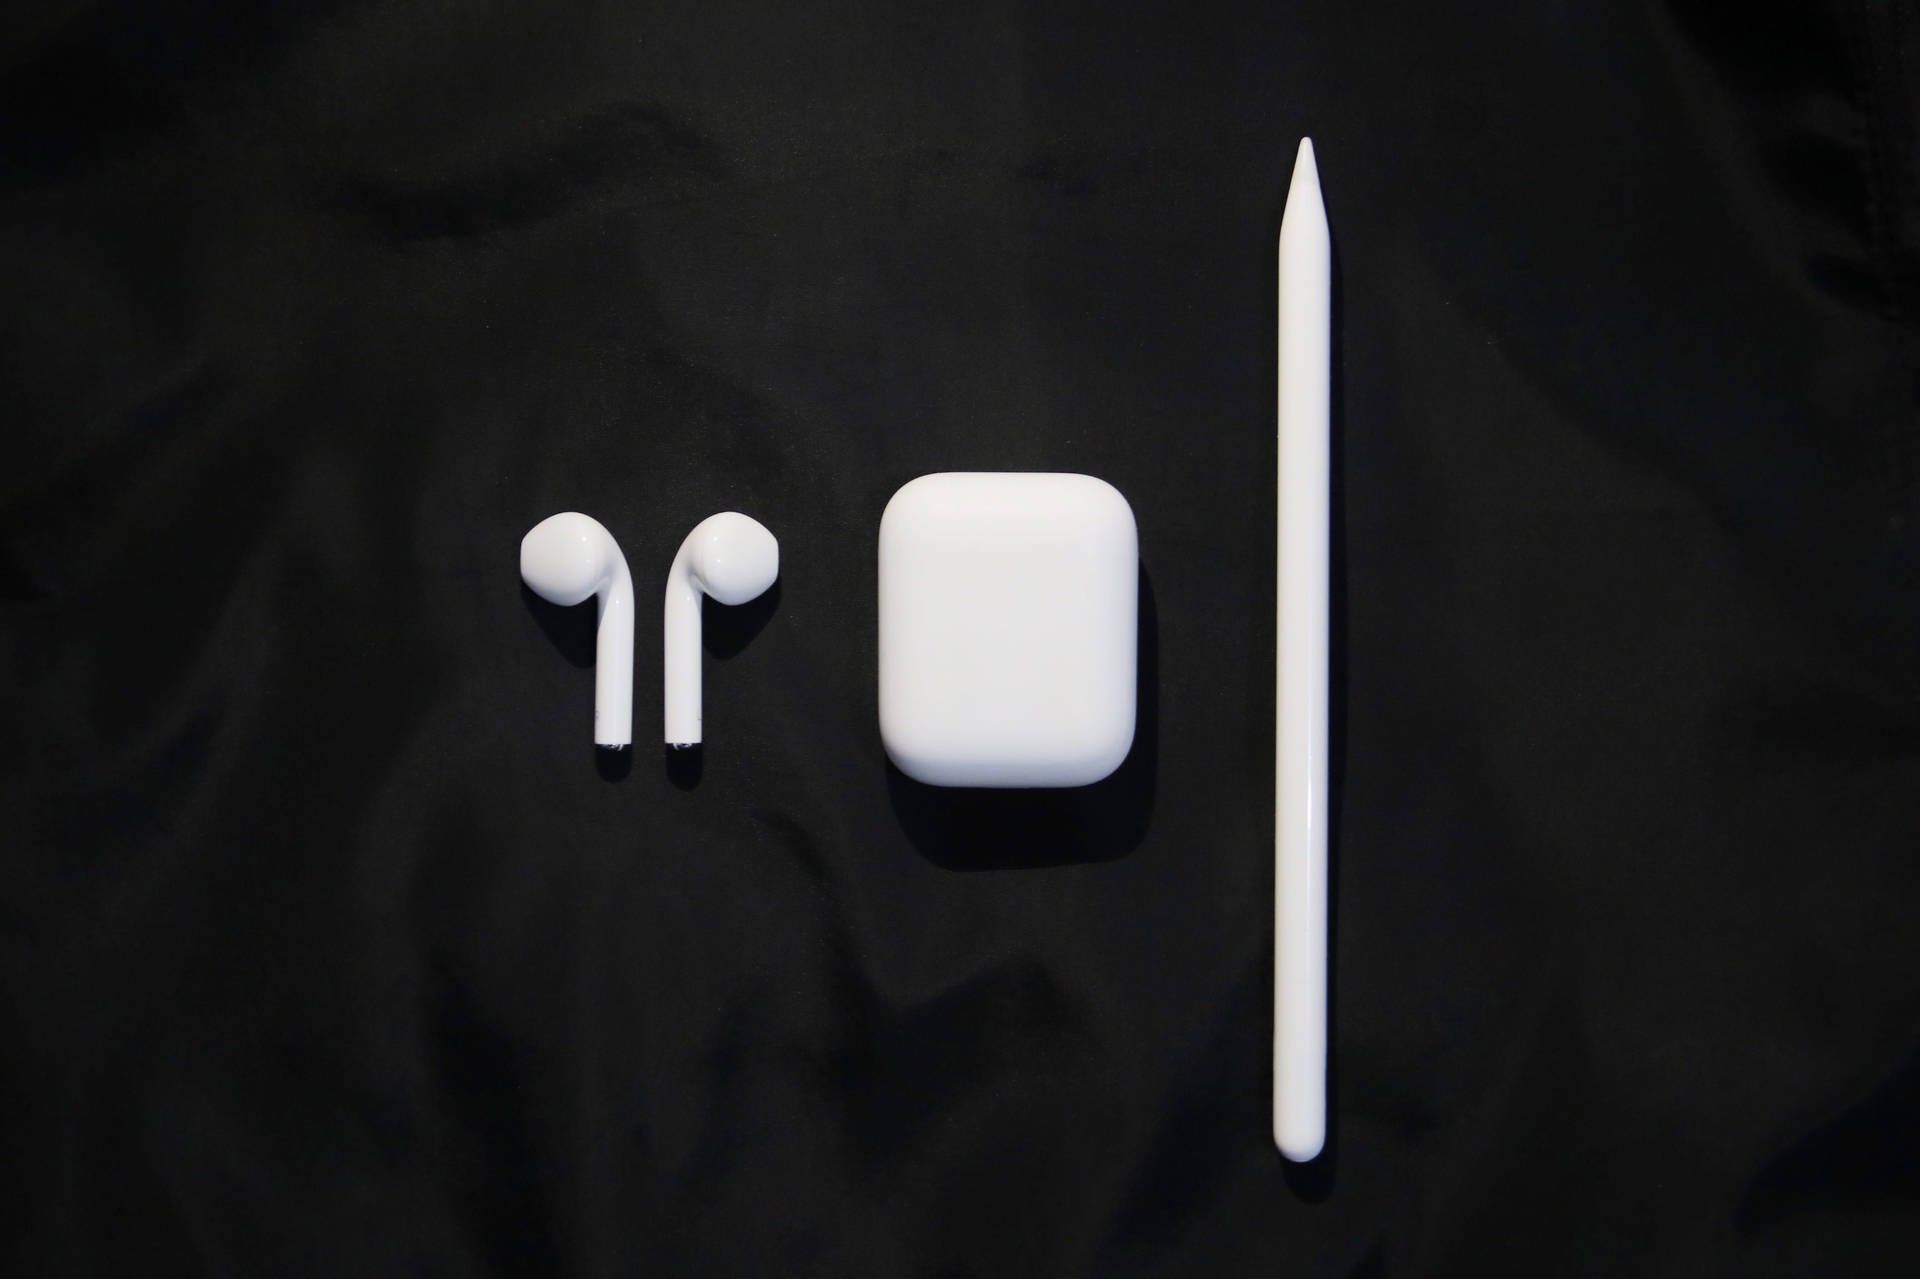 Stylish White AirPods with Accessories Wallpaper